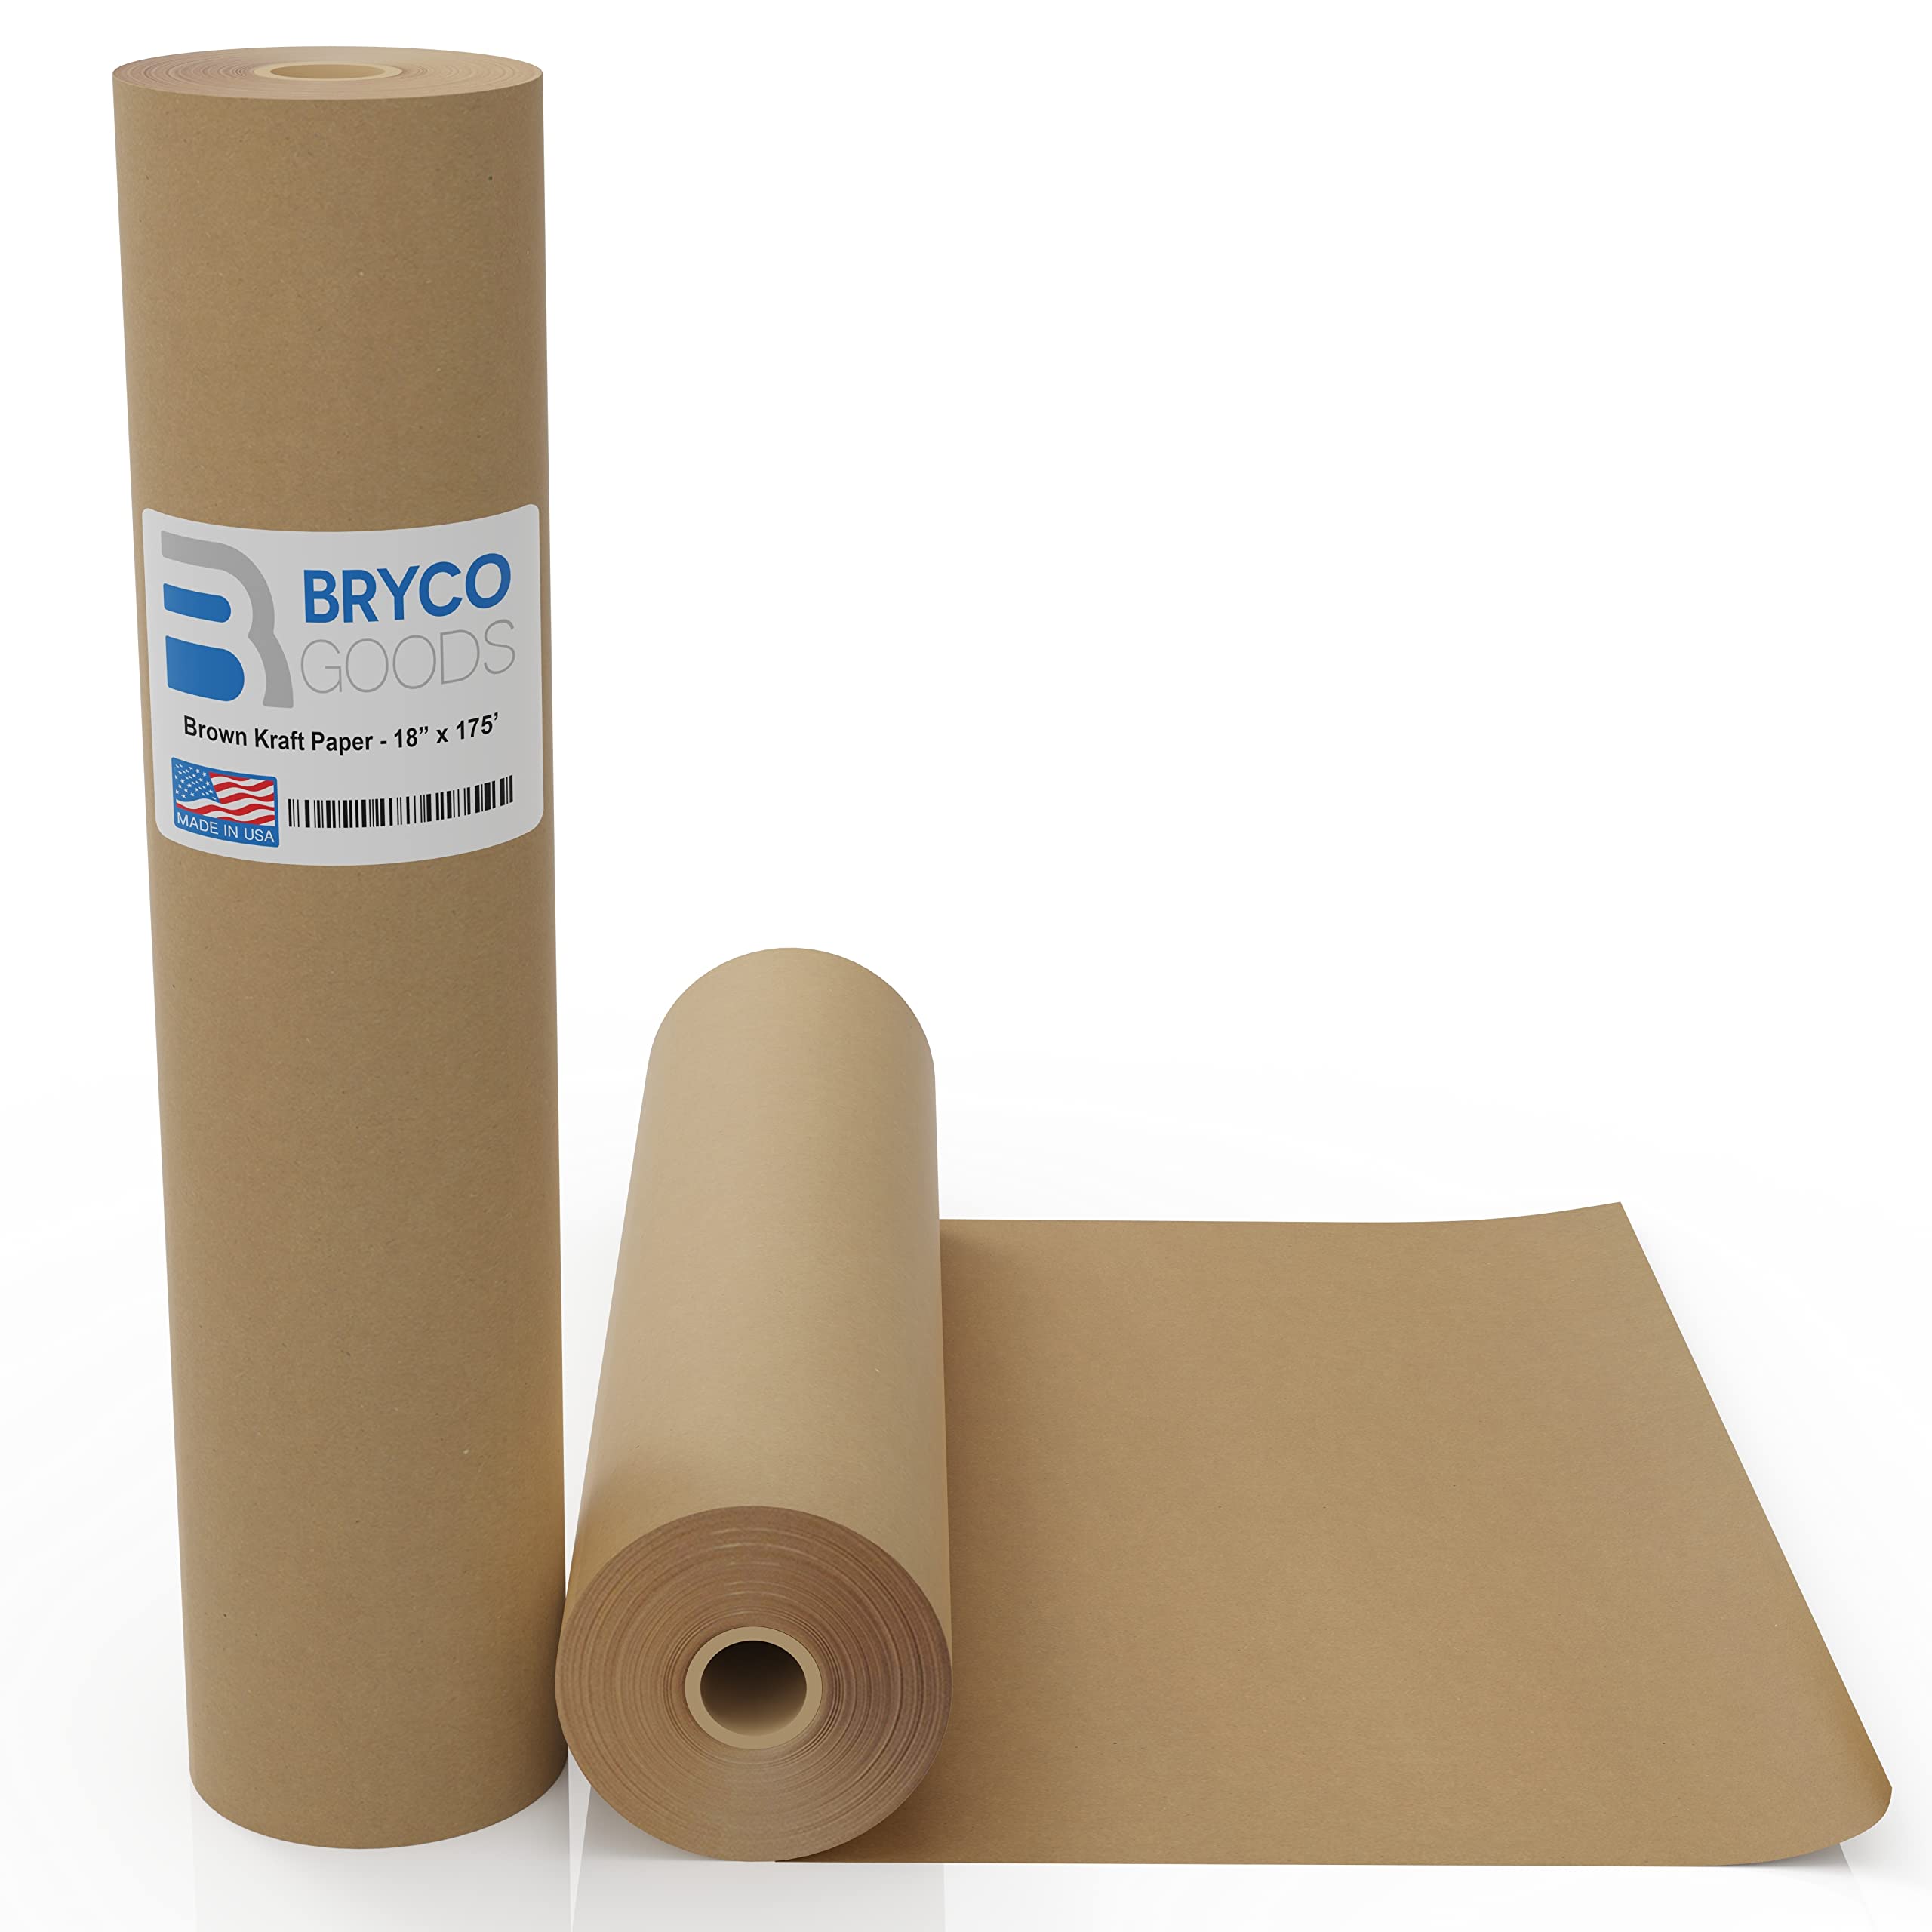 Bryco Goods White Kraft Arts and Crafts Paper Roll 18 Inches by 175 Feet  (2100 Inch). Ideal for Paints, Wall Art, Easel Paper, Fade-Resistant  Bulletin Board Paper, Gift Wrapping Paper and Kids